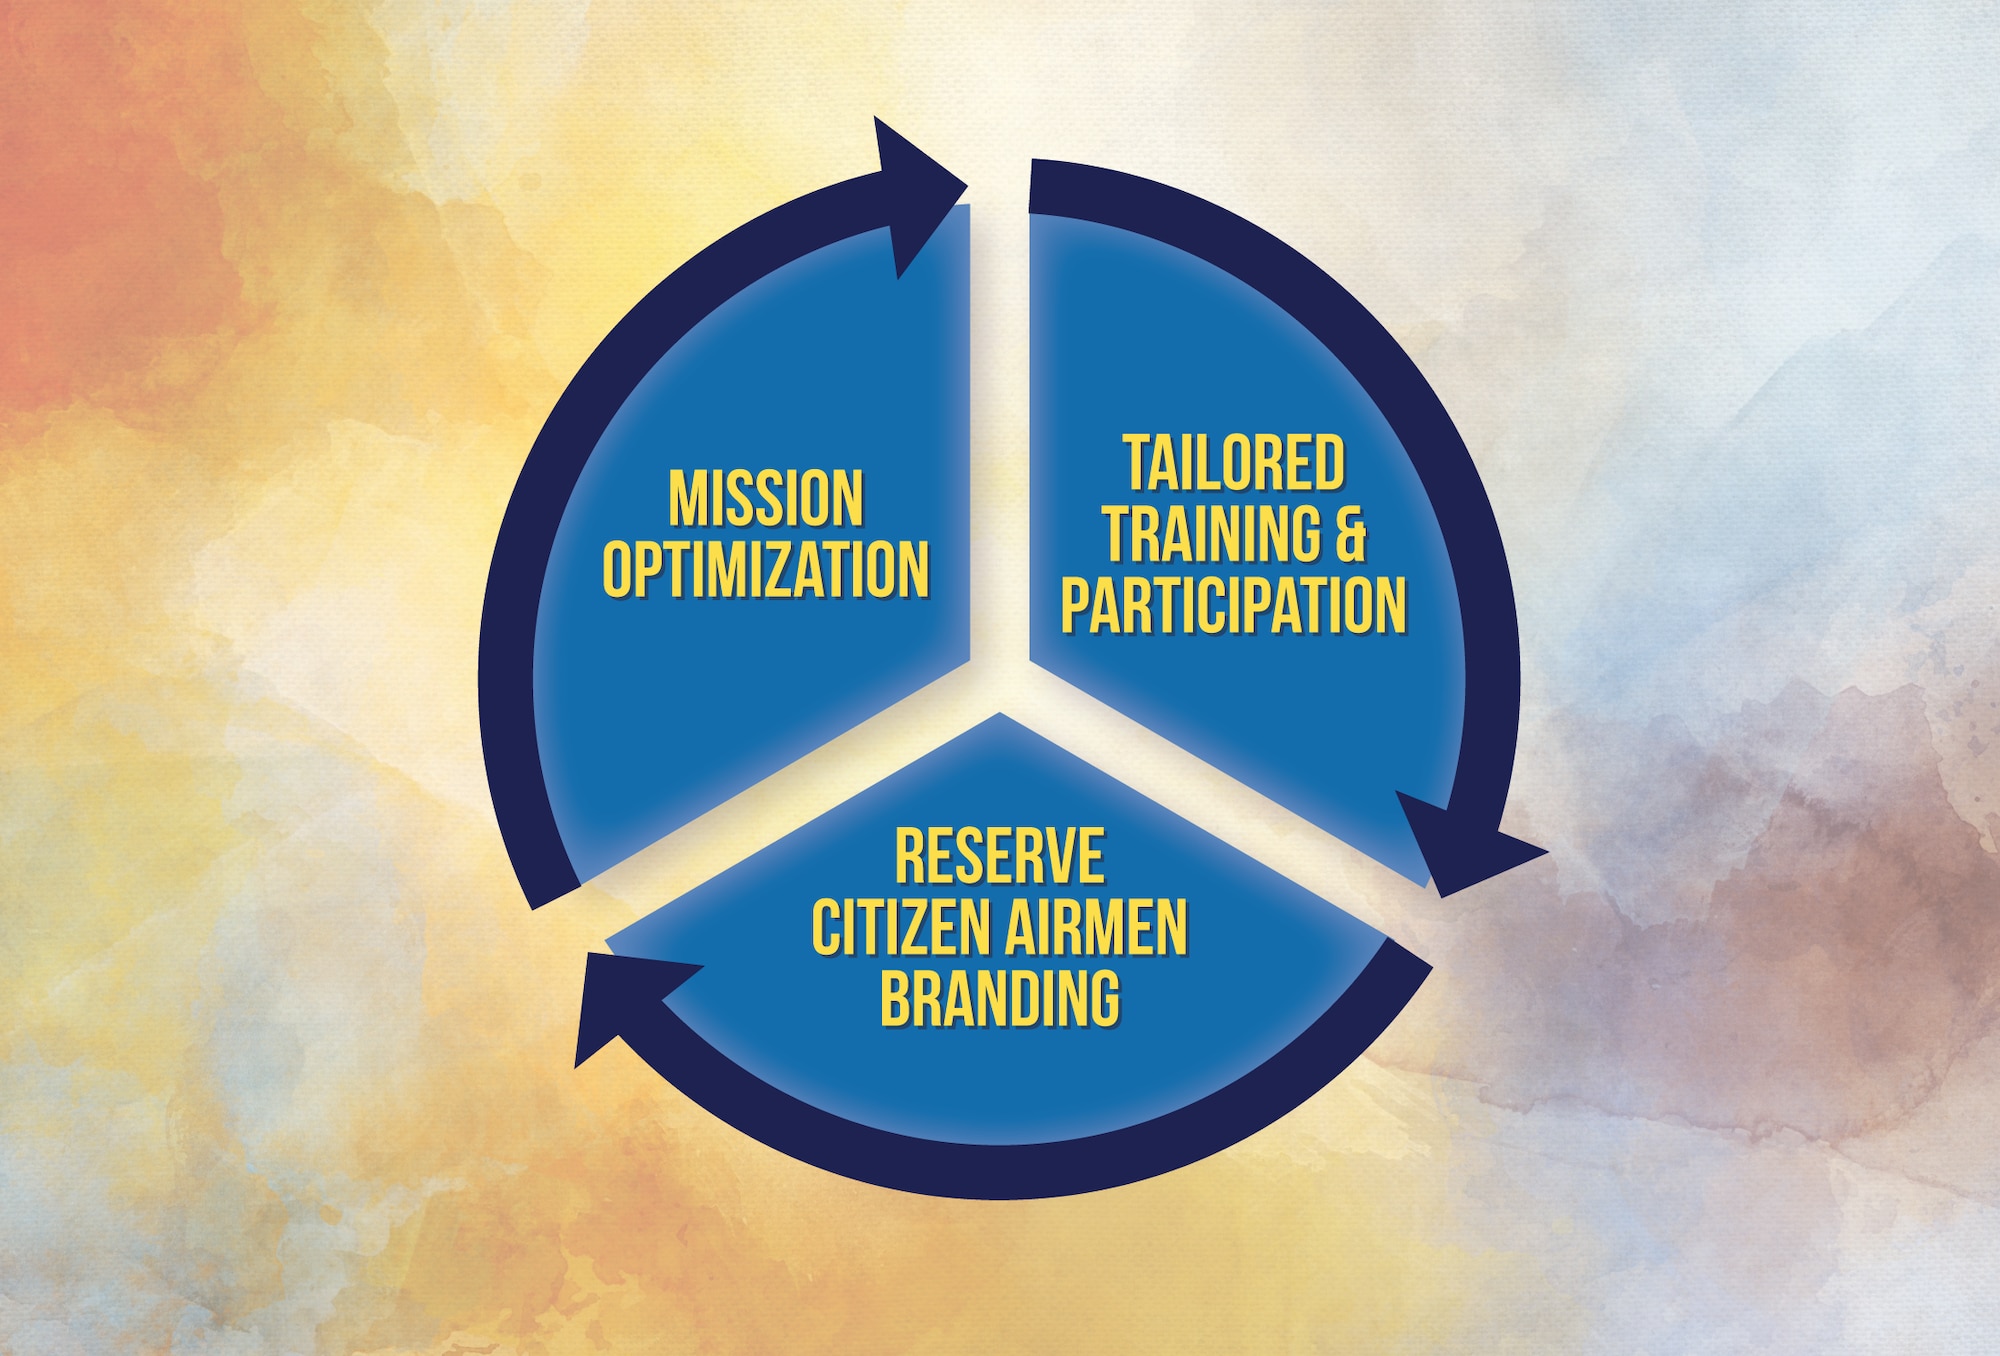 Three strategic concepts -- mission oprimization, tailored training and participation, and Reserve Citizen Airmen branding -- work together to serve as a foundation for evolutionary change to design and field the Air Force Resserve of the future. (Graphic by Anthony Burns)